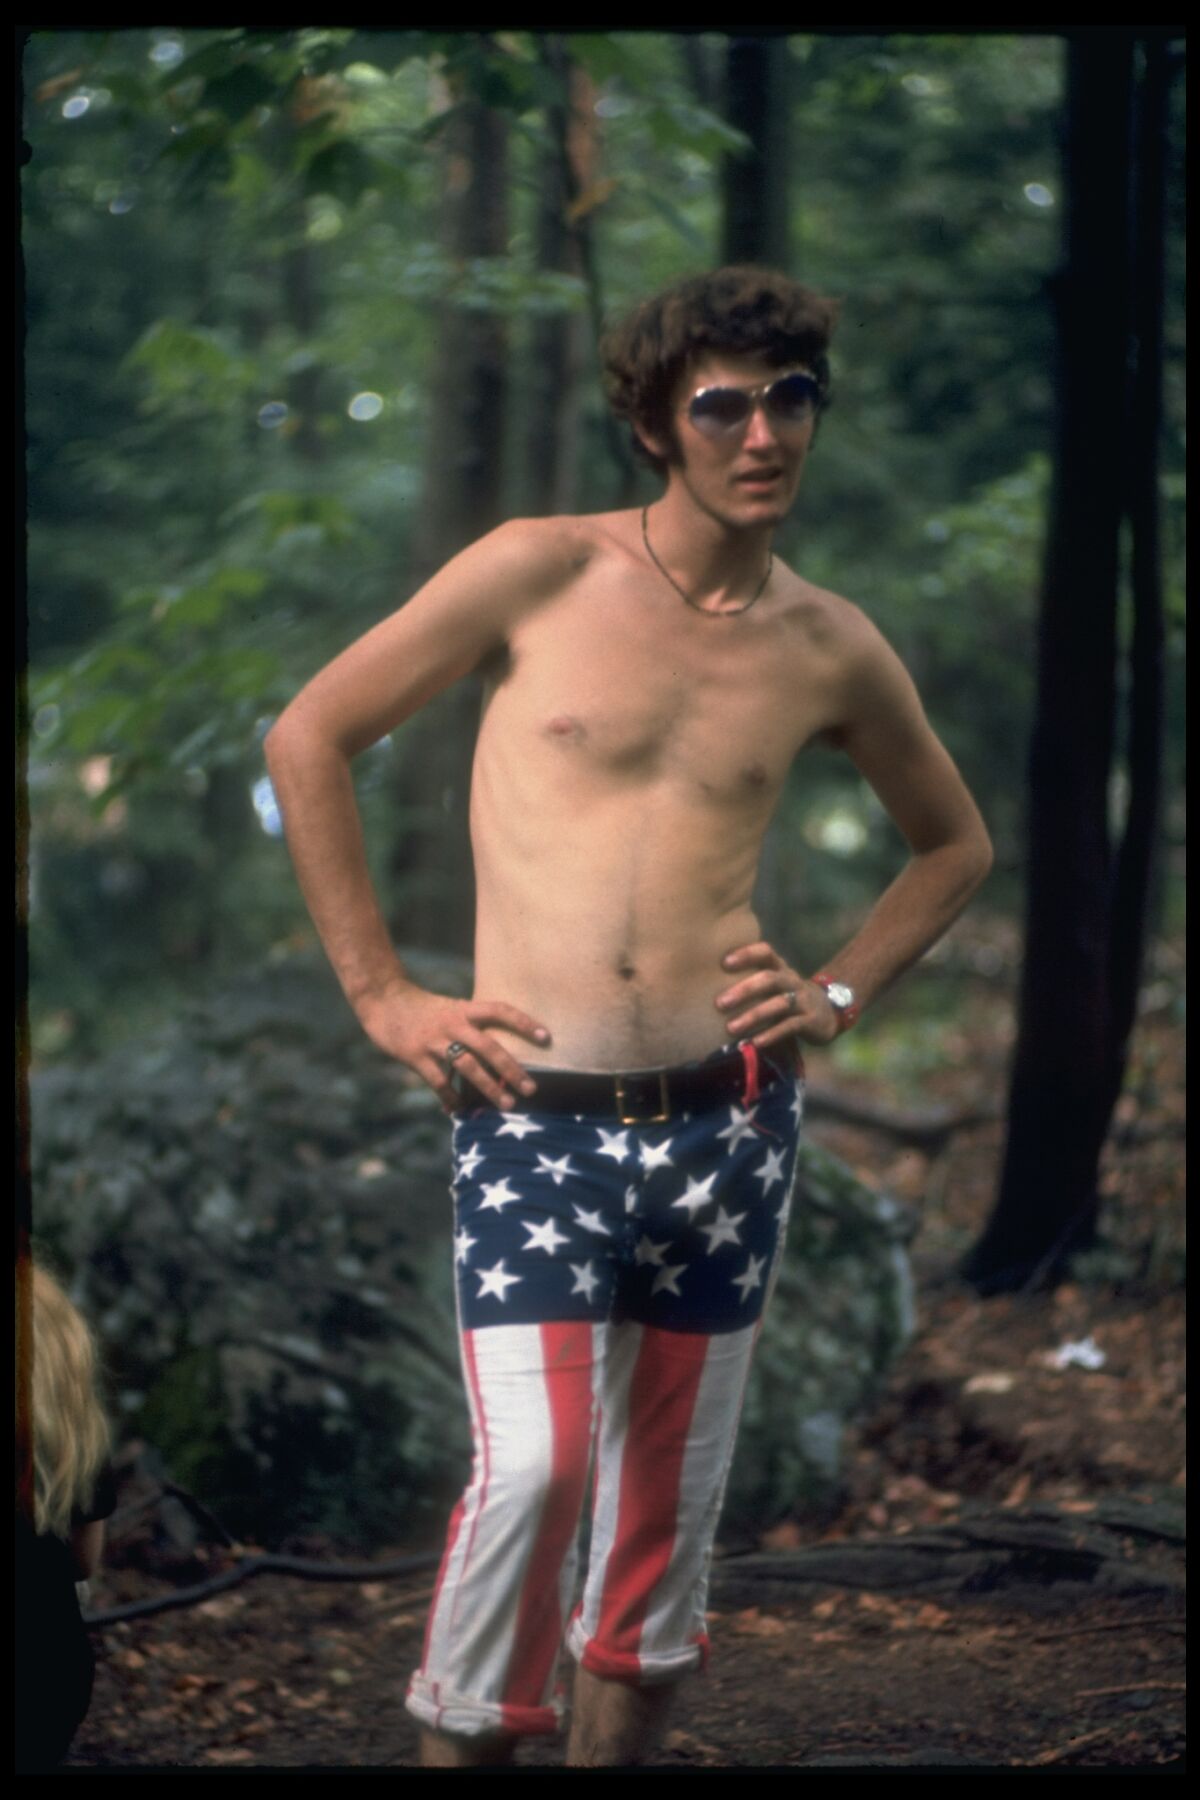 The American experiment: At Woodstock, expressions of freedom took many forms.